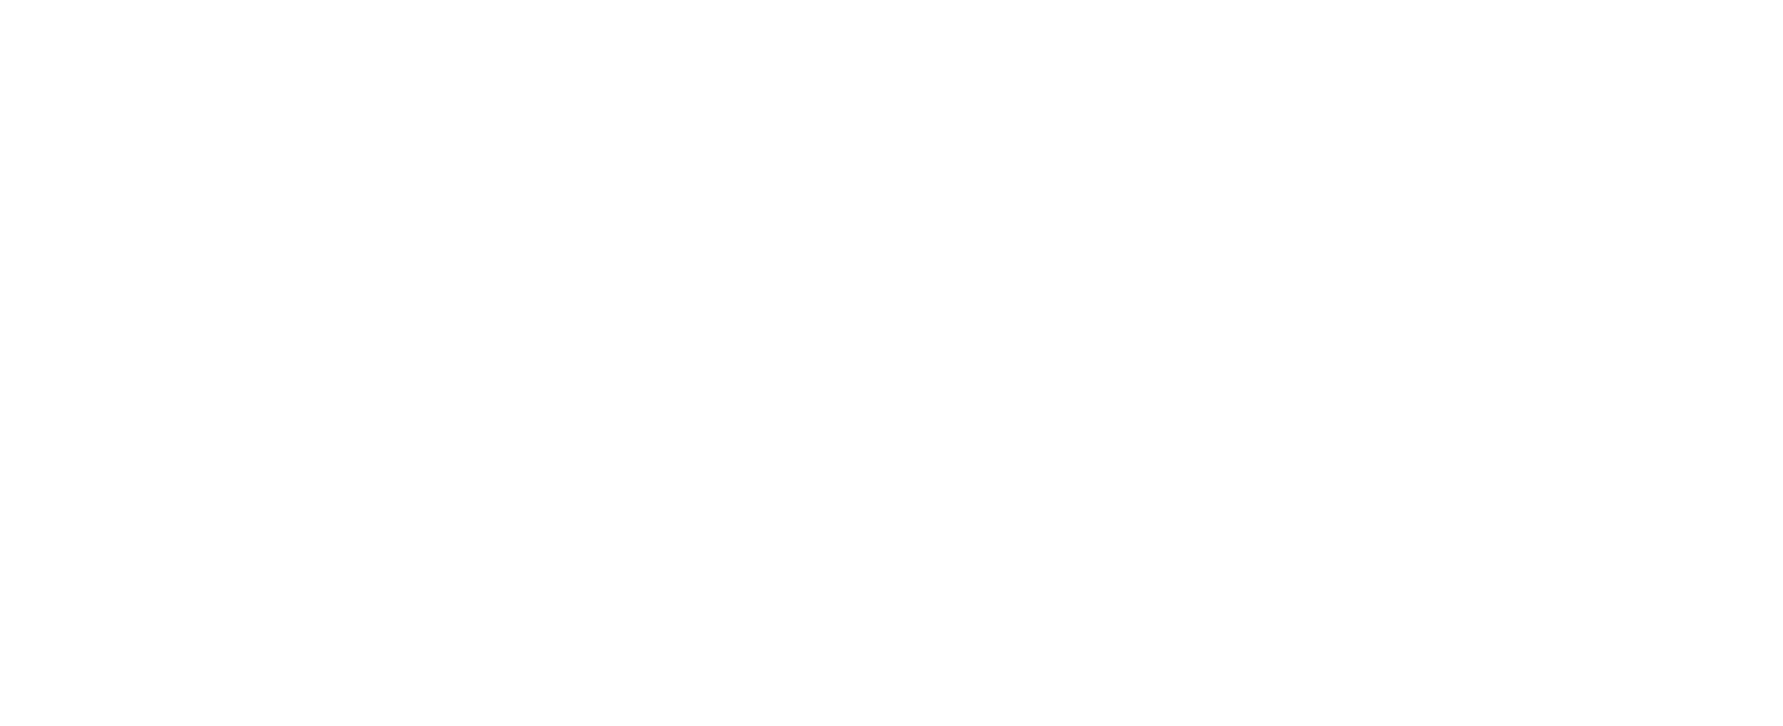 Stars, Stripes and Songs logo